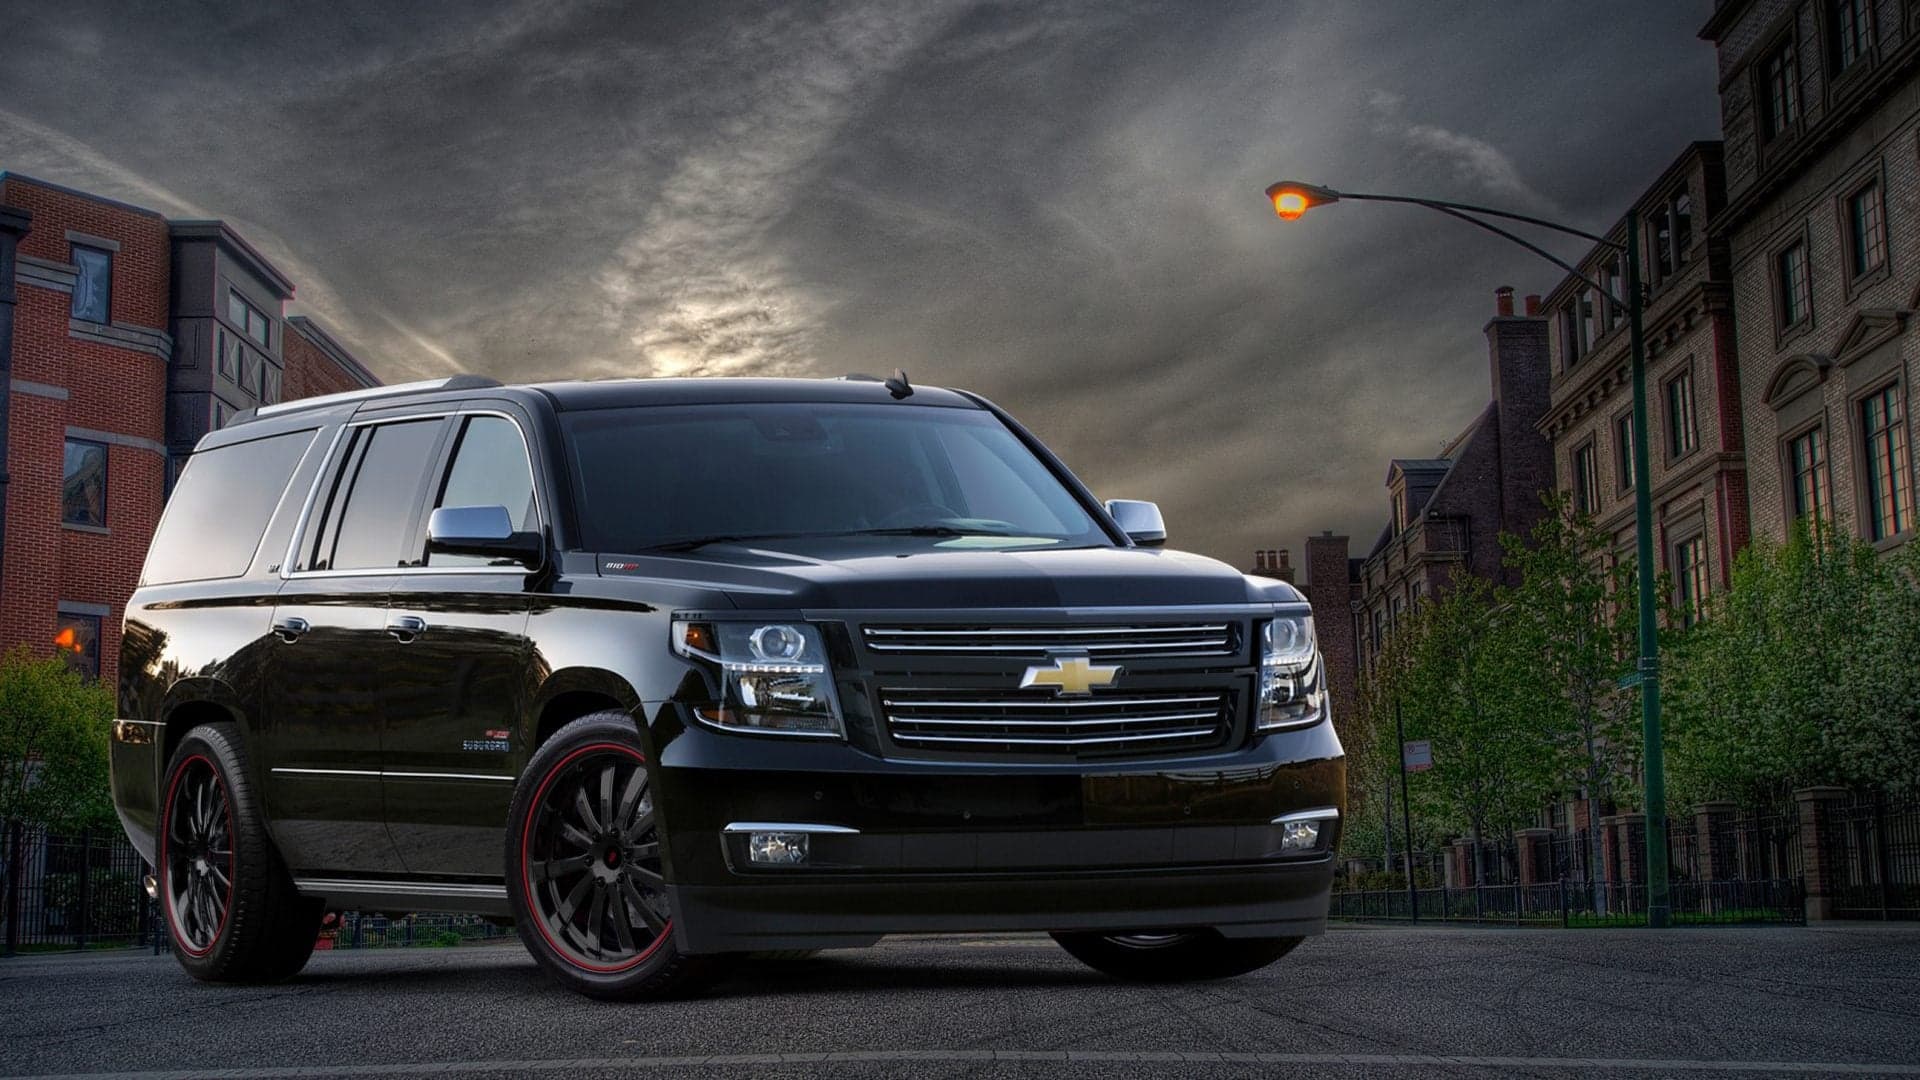 Chevy Dealers Are Now Selling 1,000-HP Tahoes and Suburbans